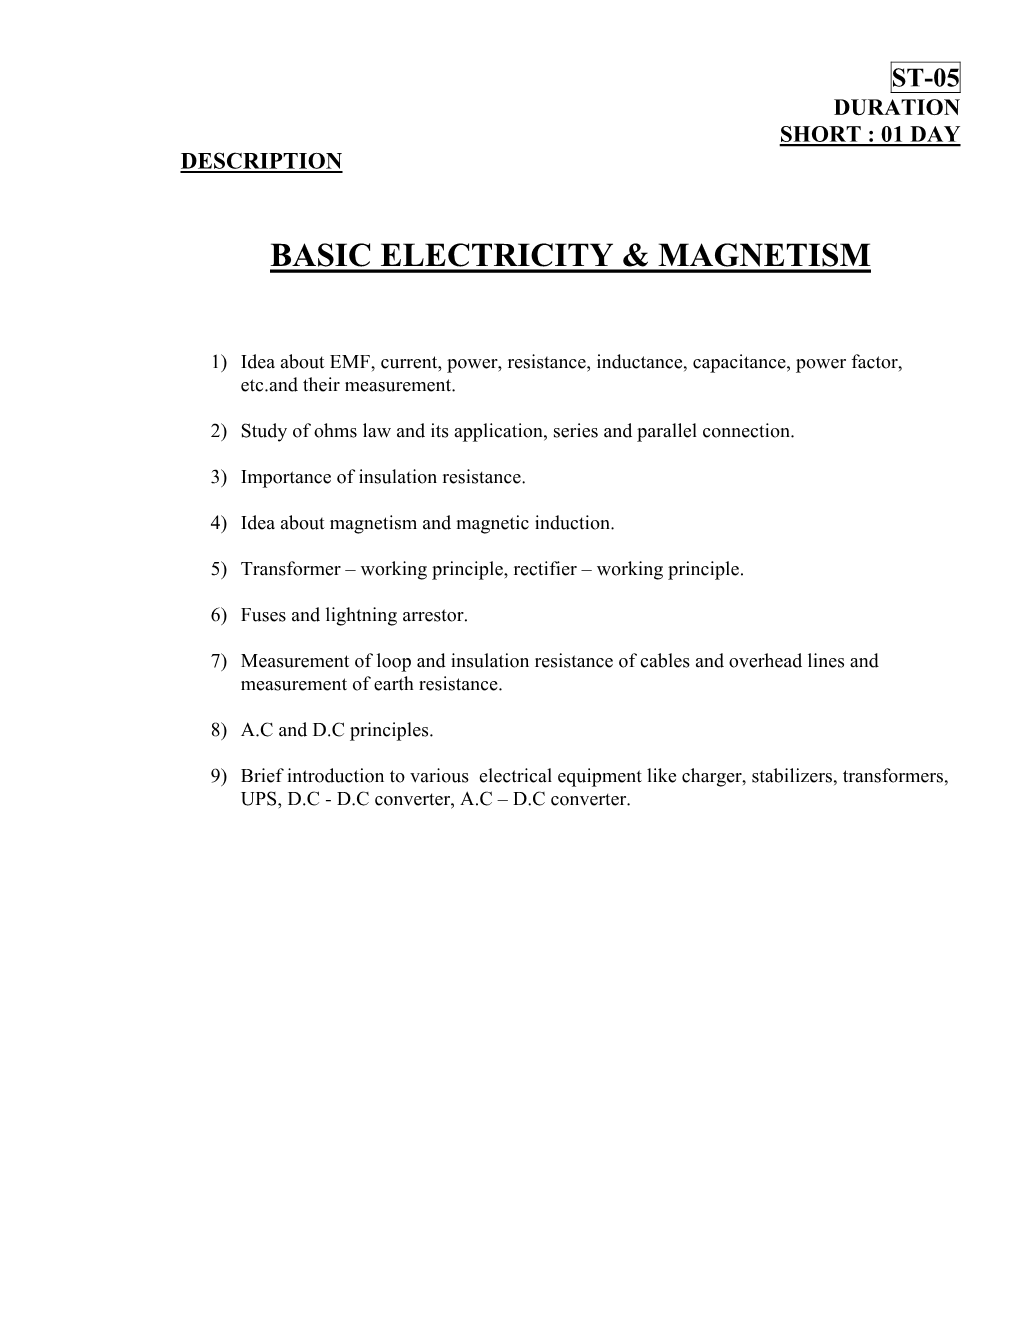 Basic Electricity and Magnetism